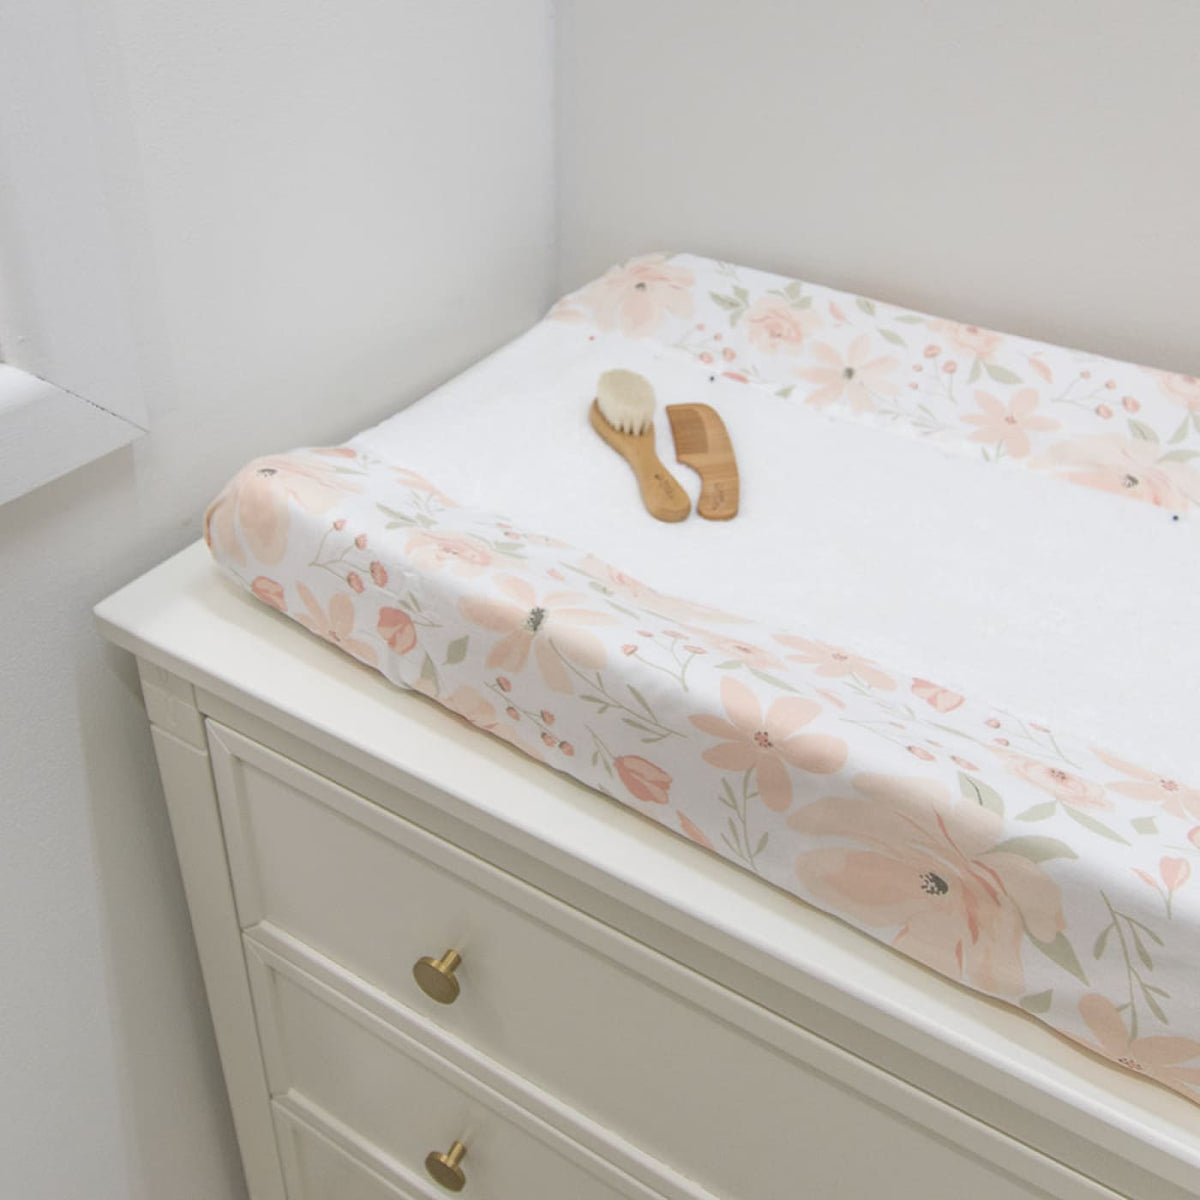 Lolli Living Change pad cover - Meadow Floral - Meadow - BATHTIME &amp; CHANGING - CHANGE MATS/COVERS